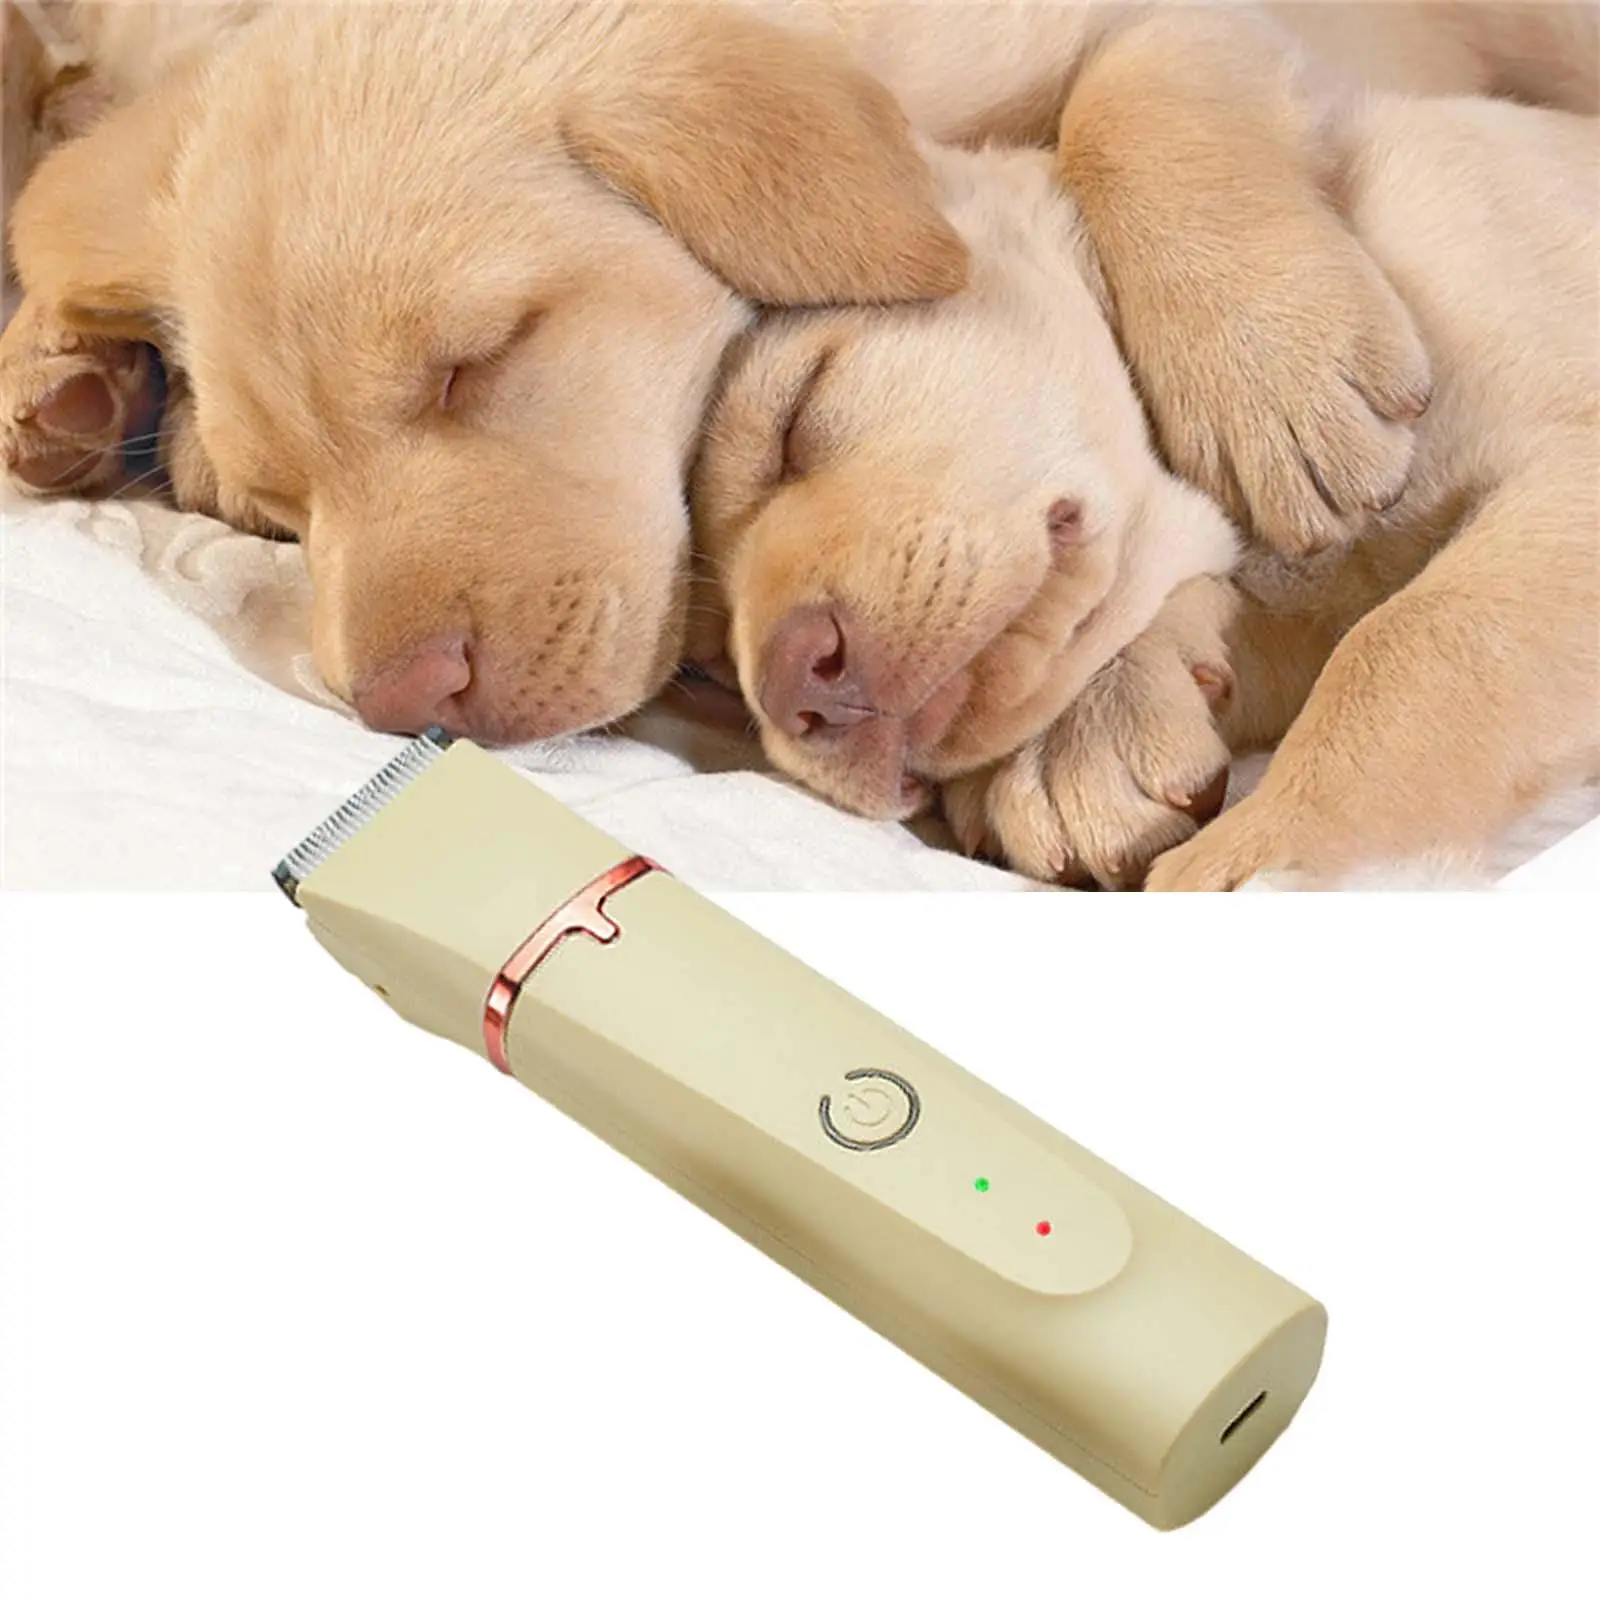 Dog Clipper Professional Pet Grooming Tool Electric for Rump Ears Face